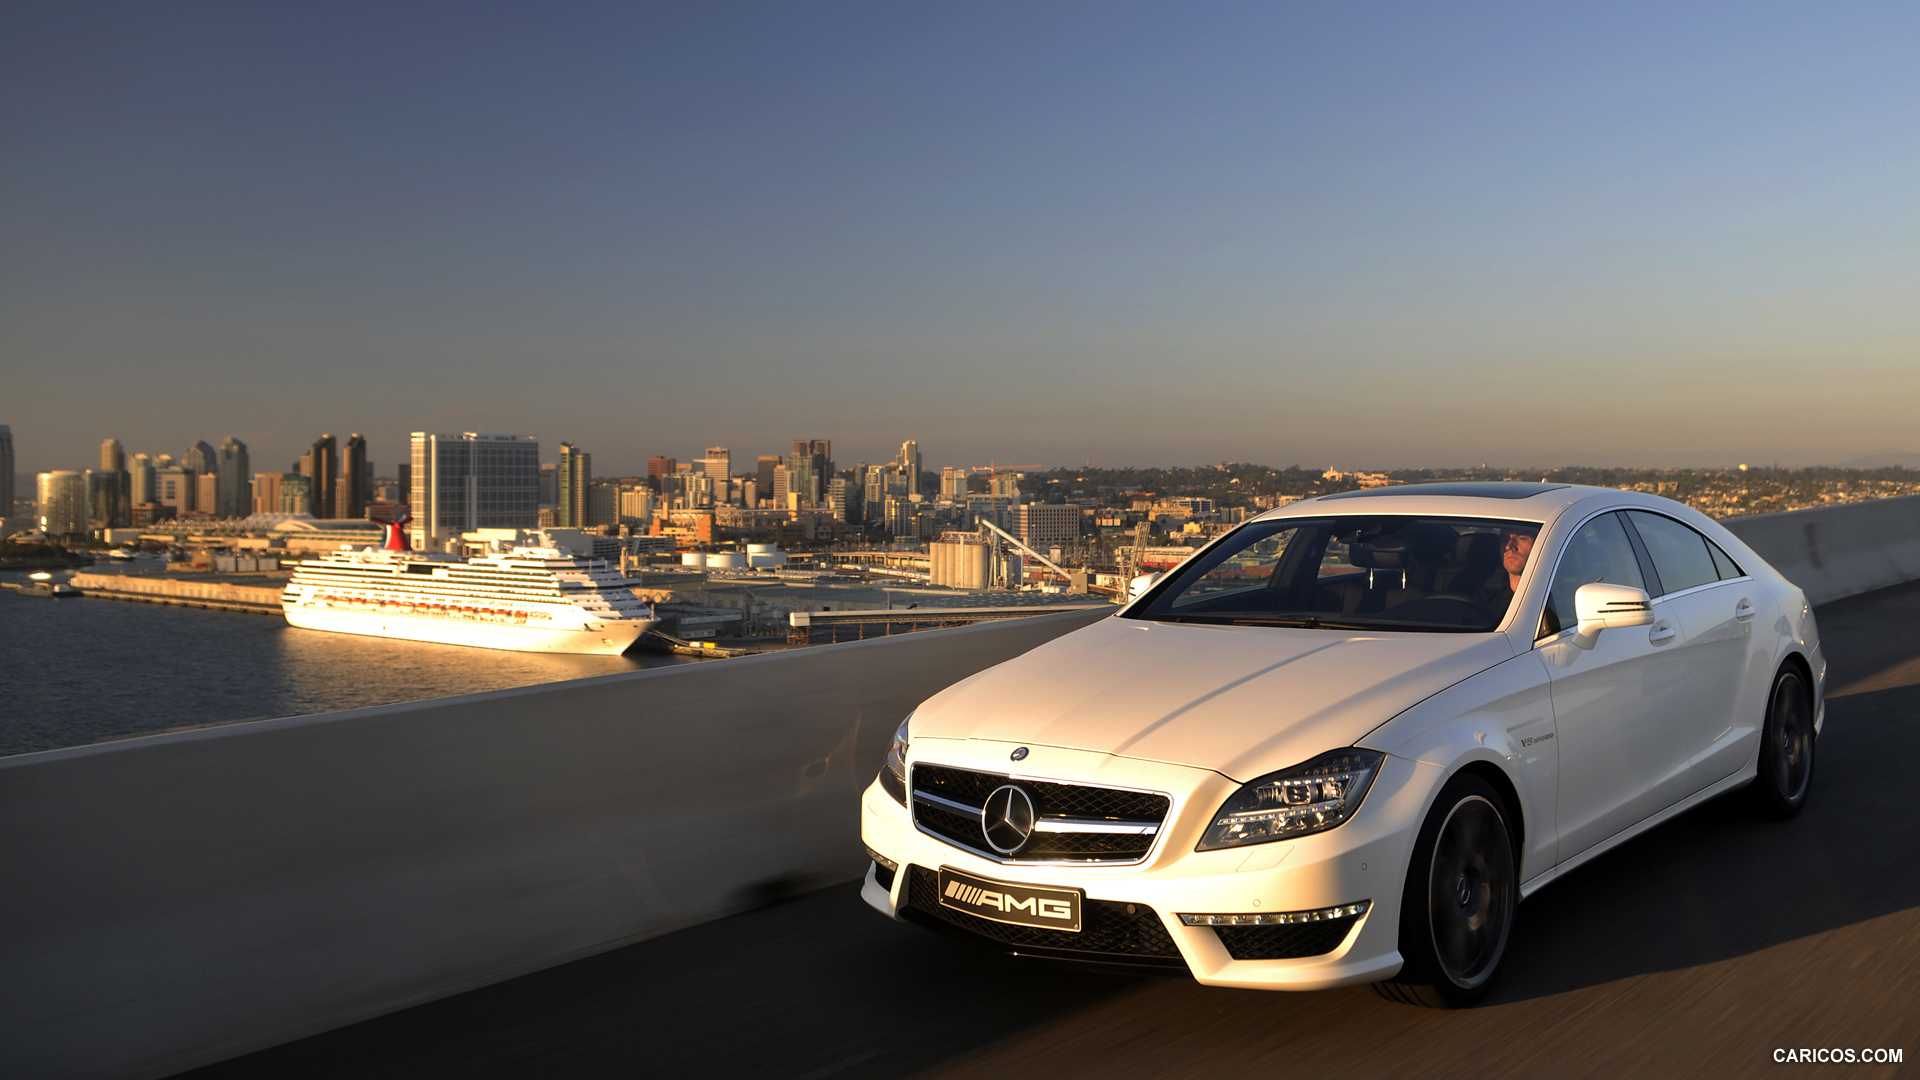 Mercedes-Benz CLS63 AMG (2012) US-Version - Diamond White - Front , #9 of 100